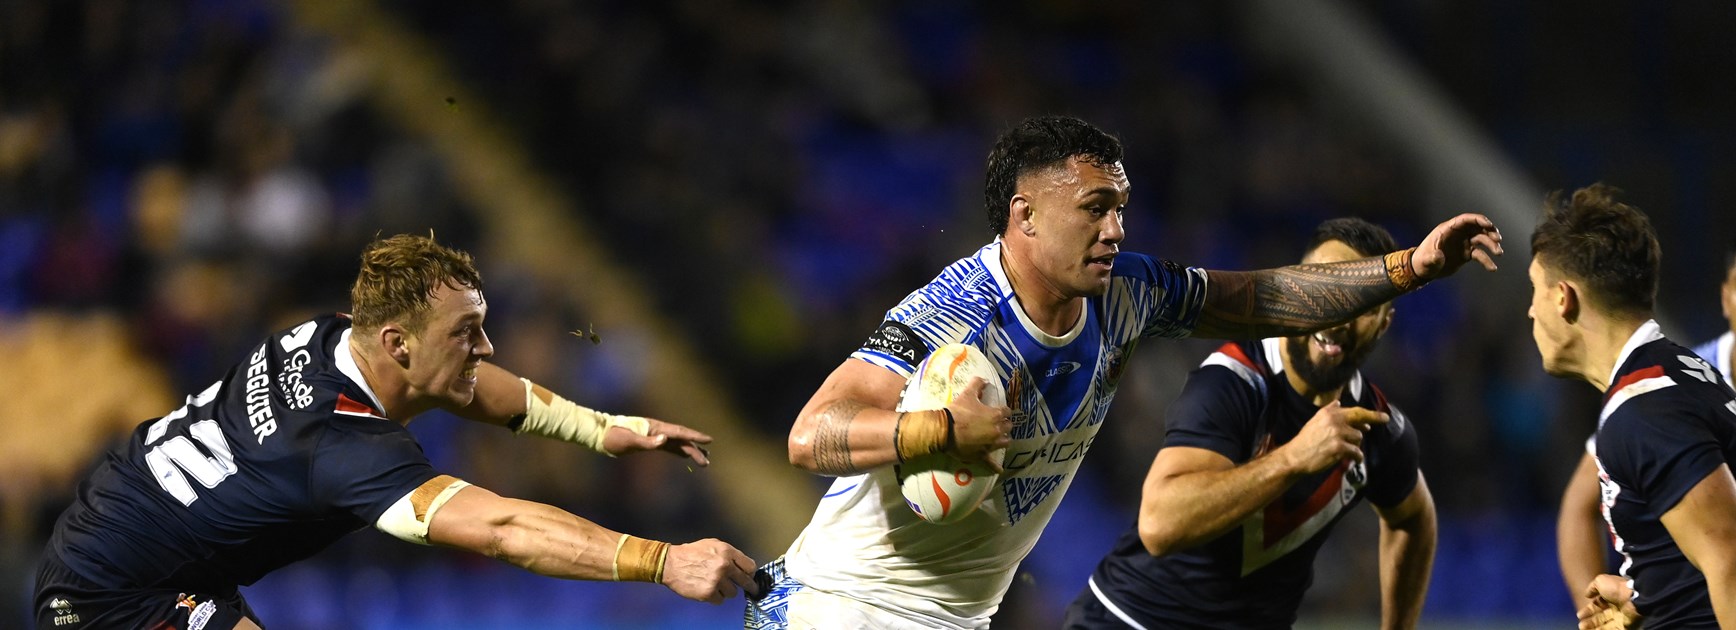 May scores four as Samoa beat France to advance